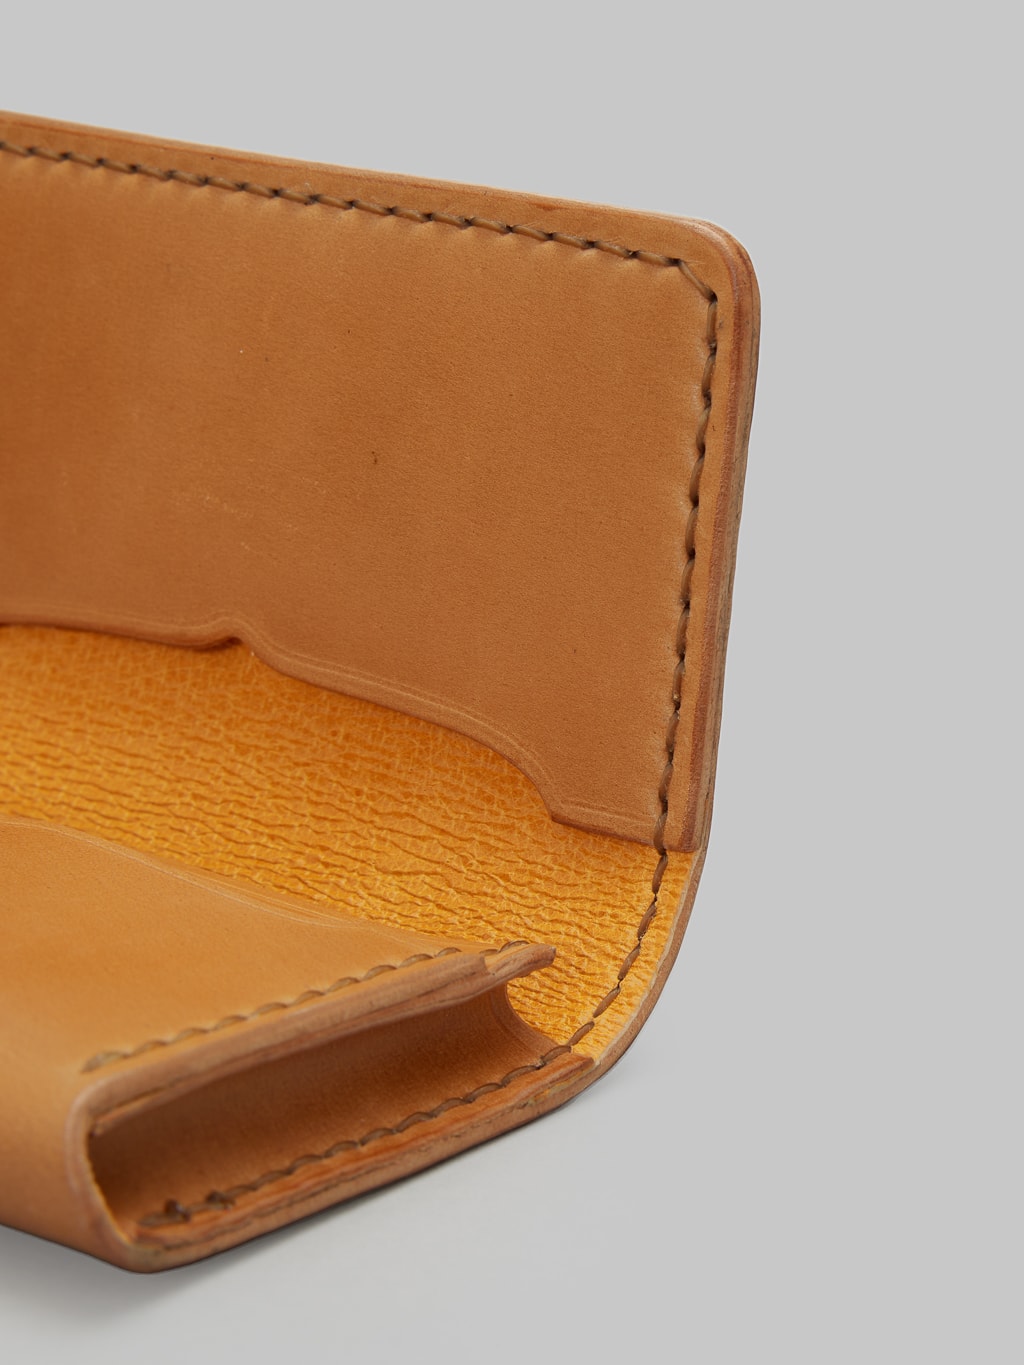 The Flat Head handsewn small cordovan card case camel texture